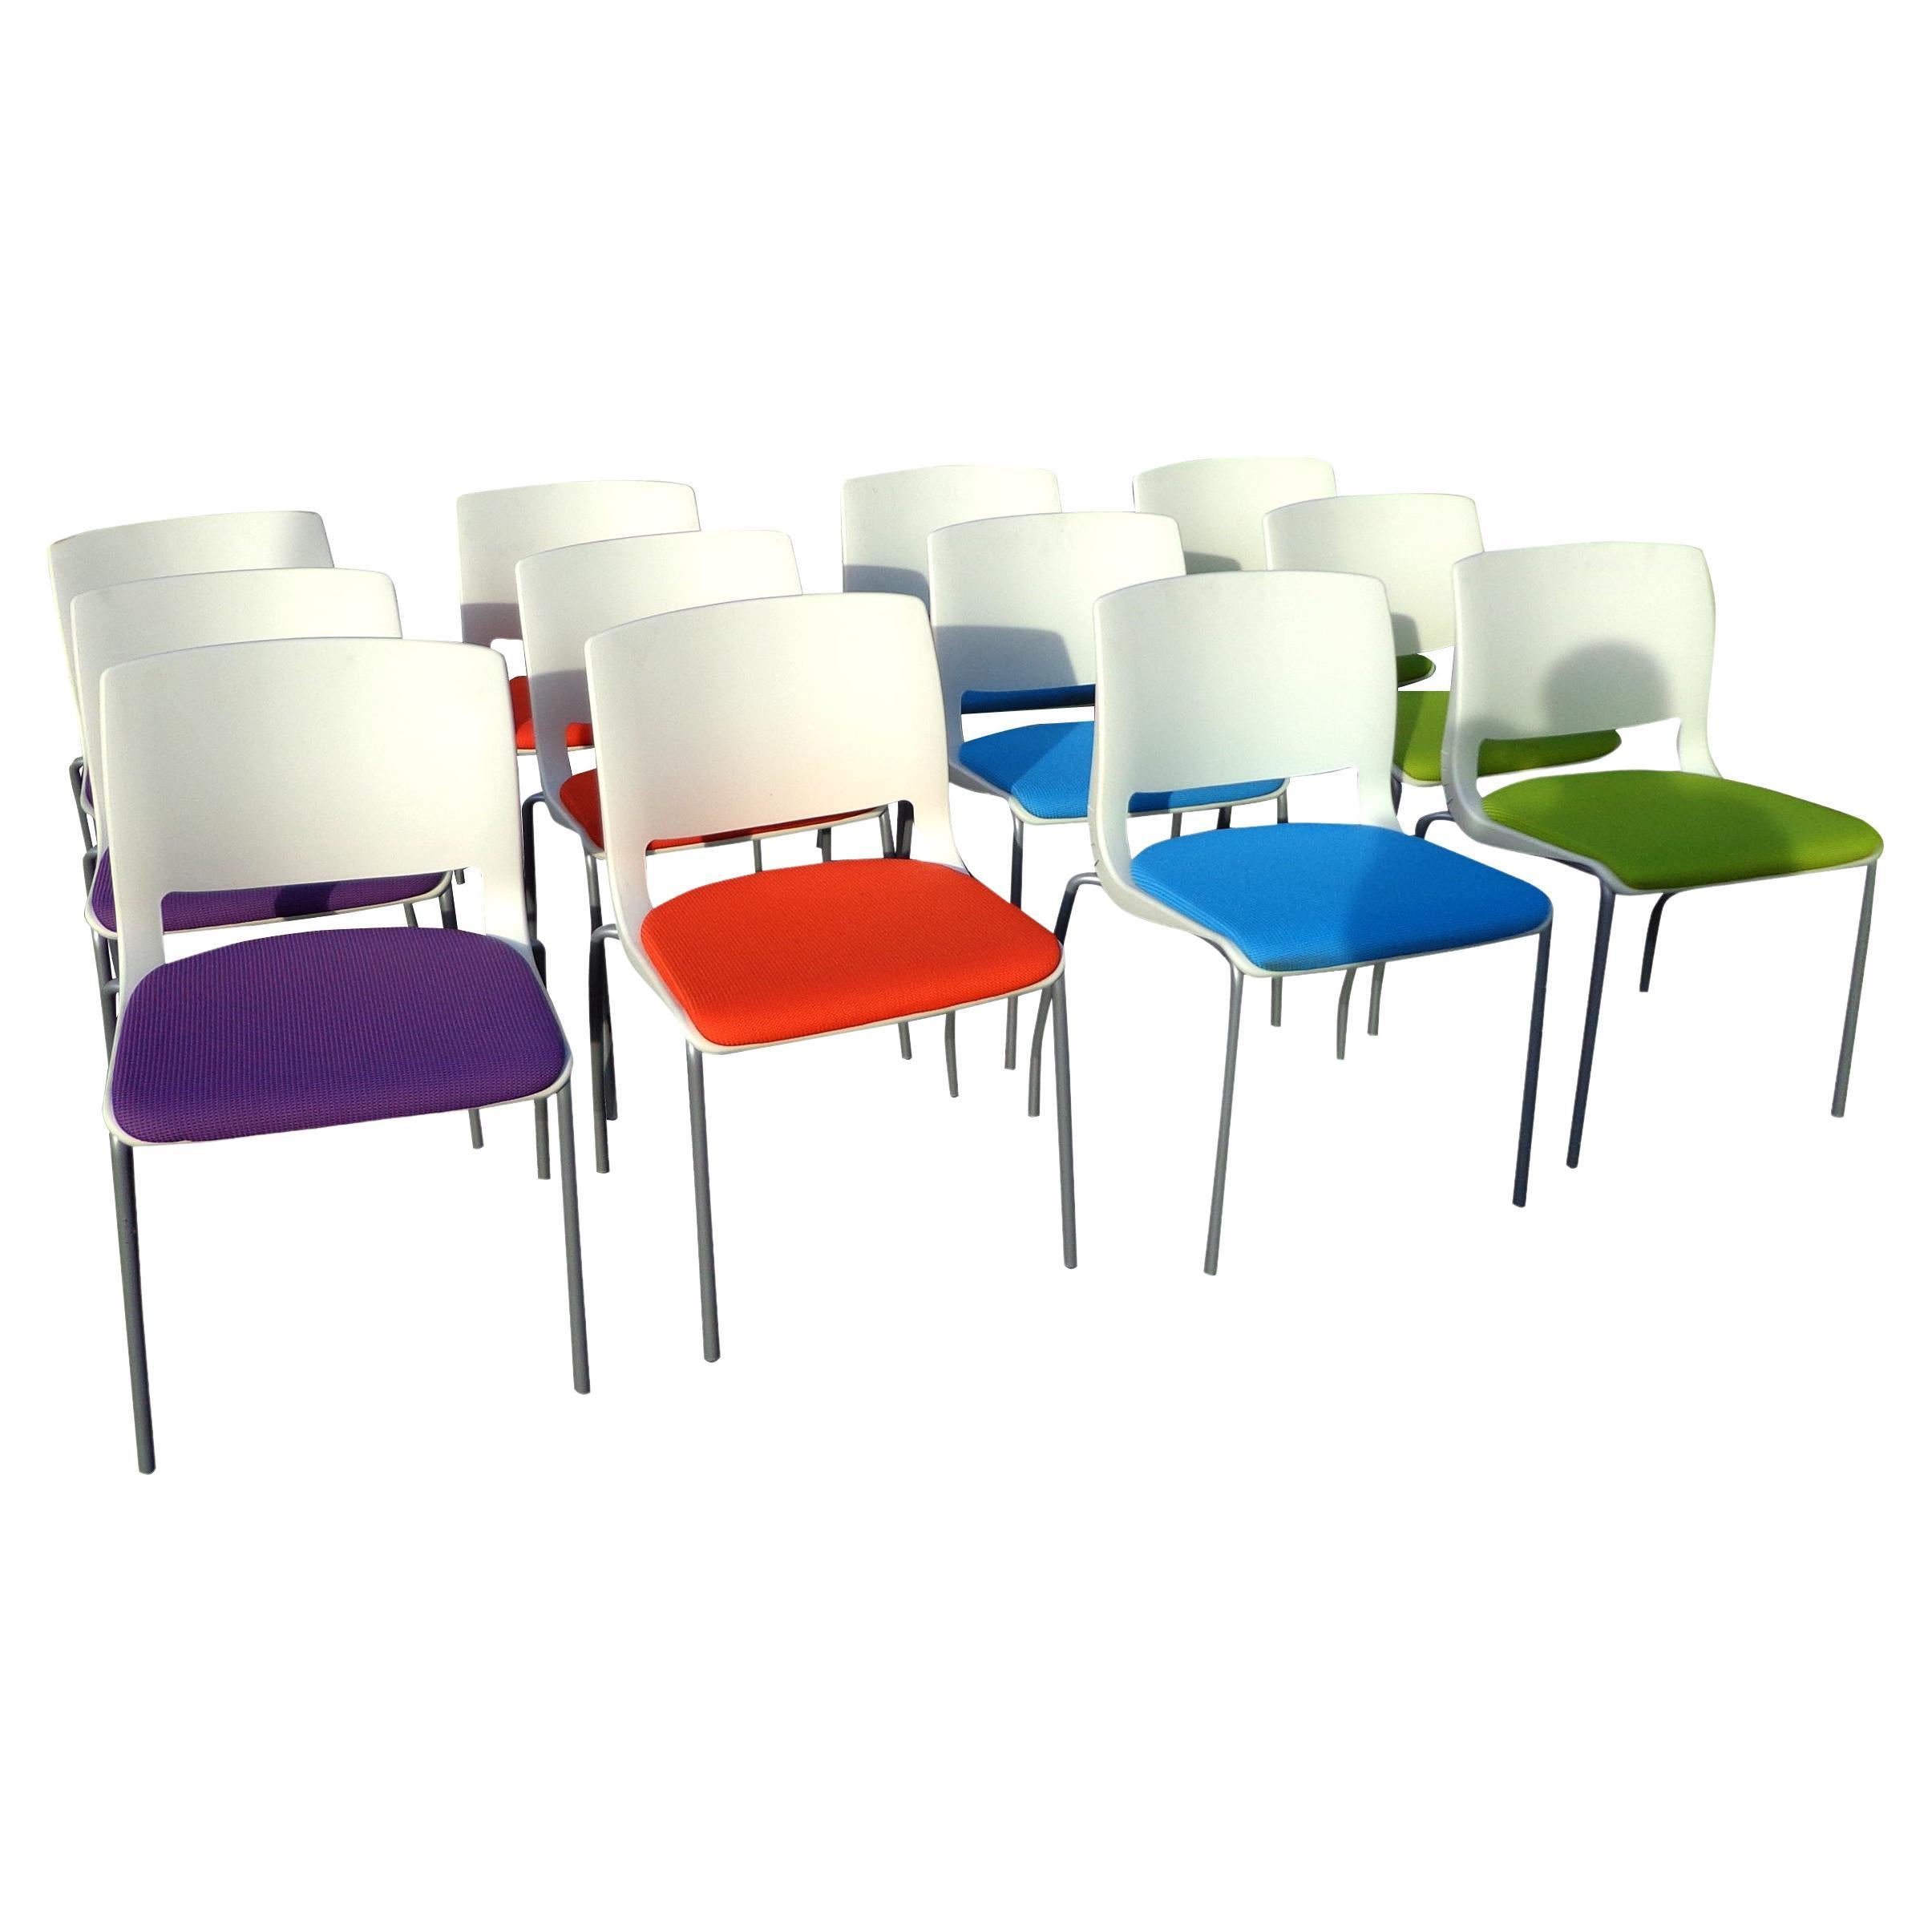 1 Teknion Variable Stacking Chair by by Alessandro Piretti For Sale